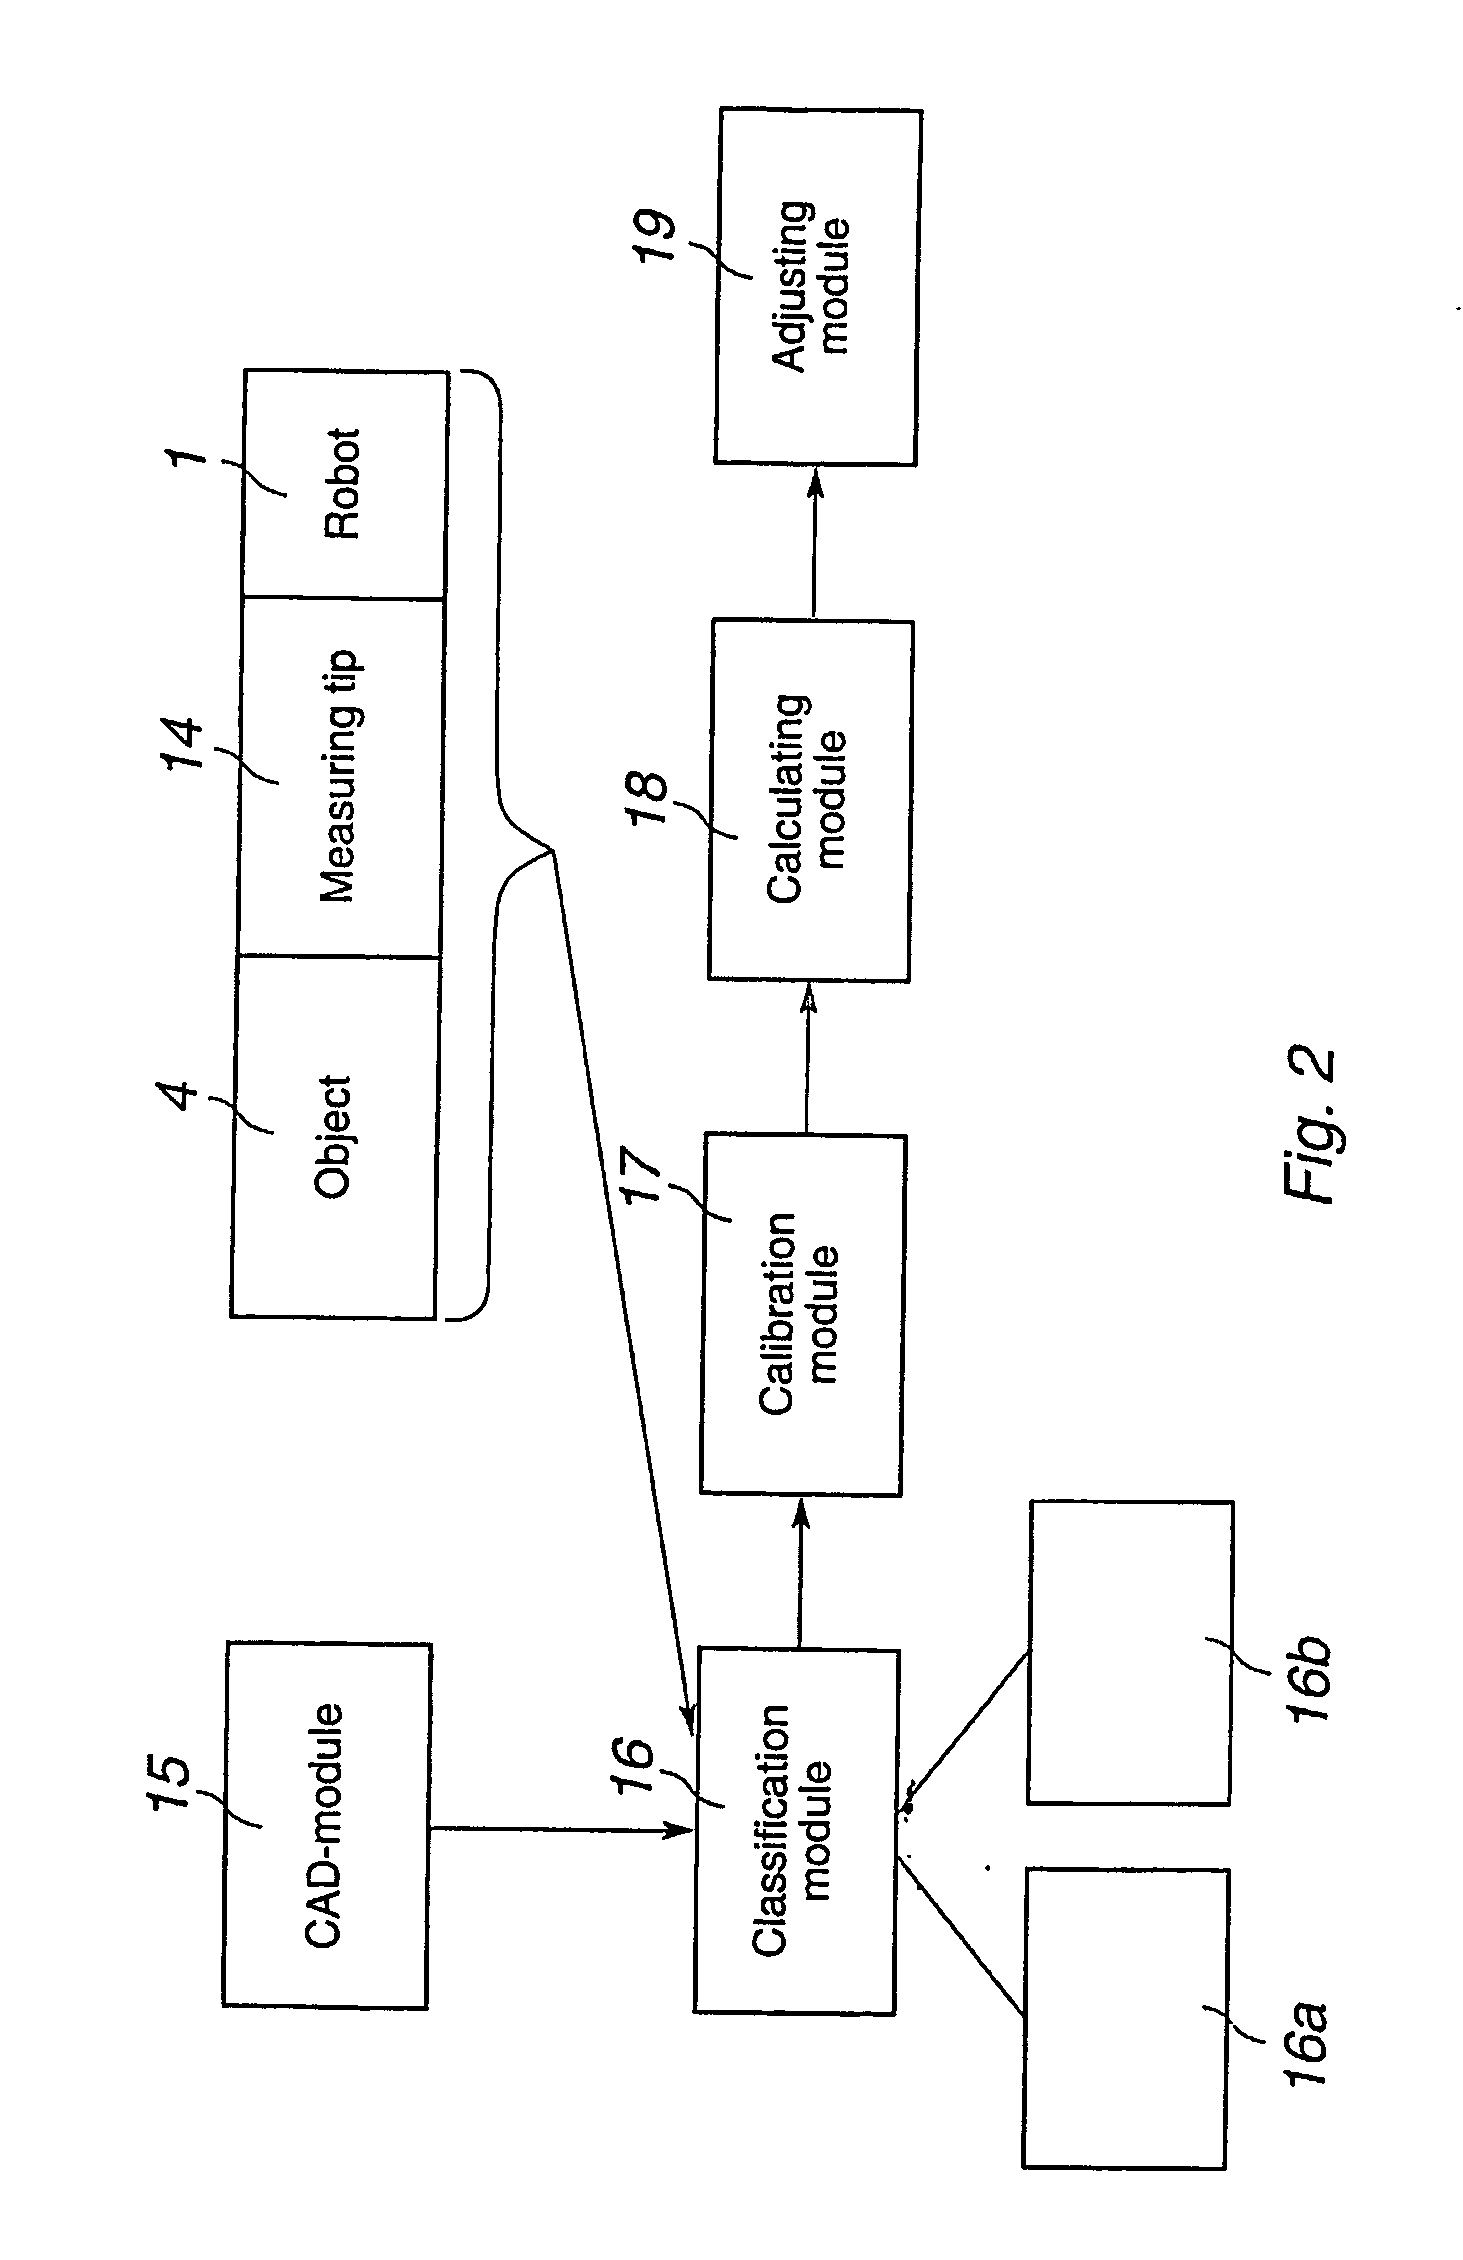 Method and a system for programming an industrial robot to move relative to defined positions on an object, including generation of a surface scanning program